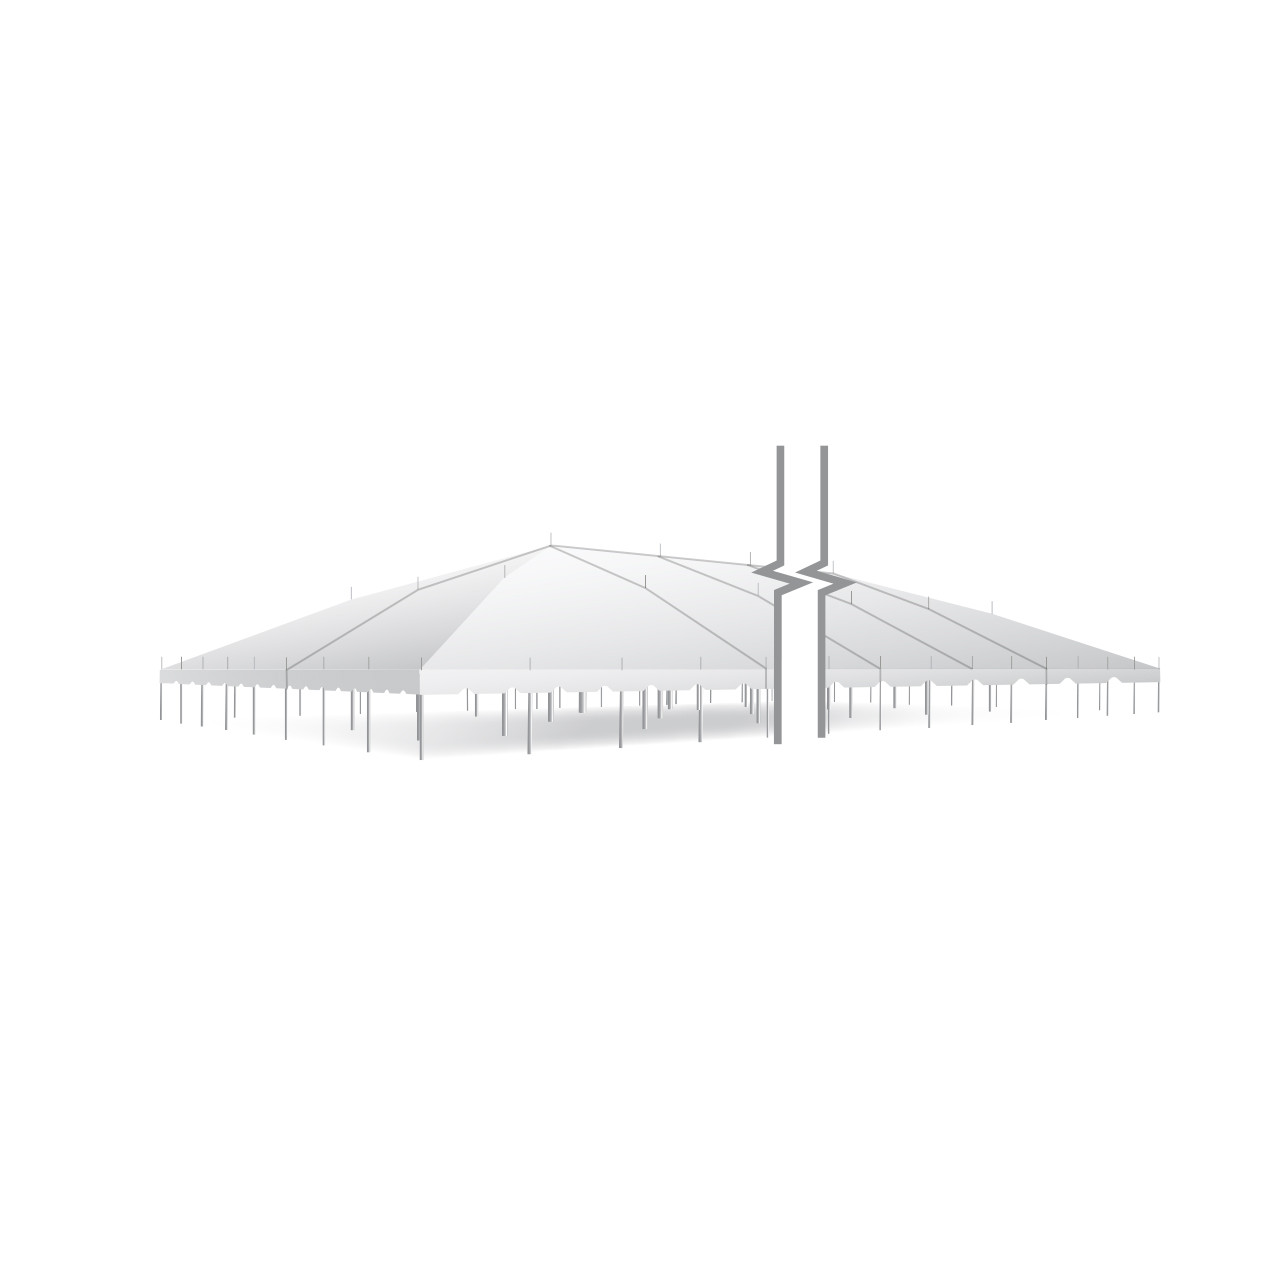 80' x 400' Classic Series Pole Tent, Sectional Tent Top, Complete